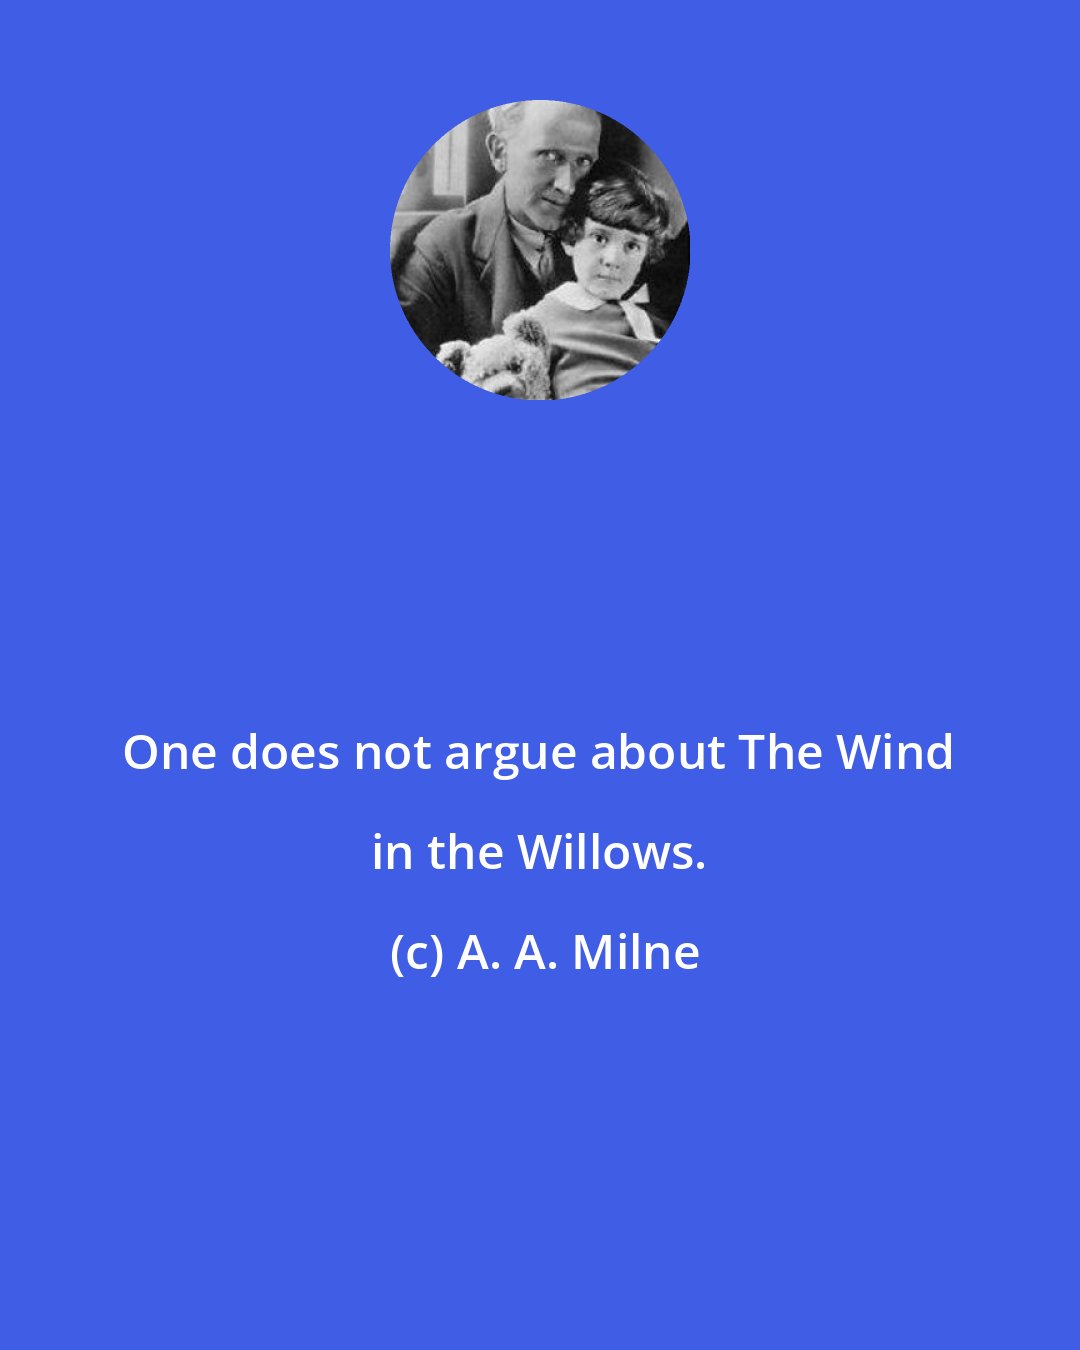 A. A. Milne: One does not argue about The Wind in the Willows.